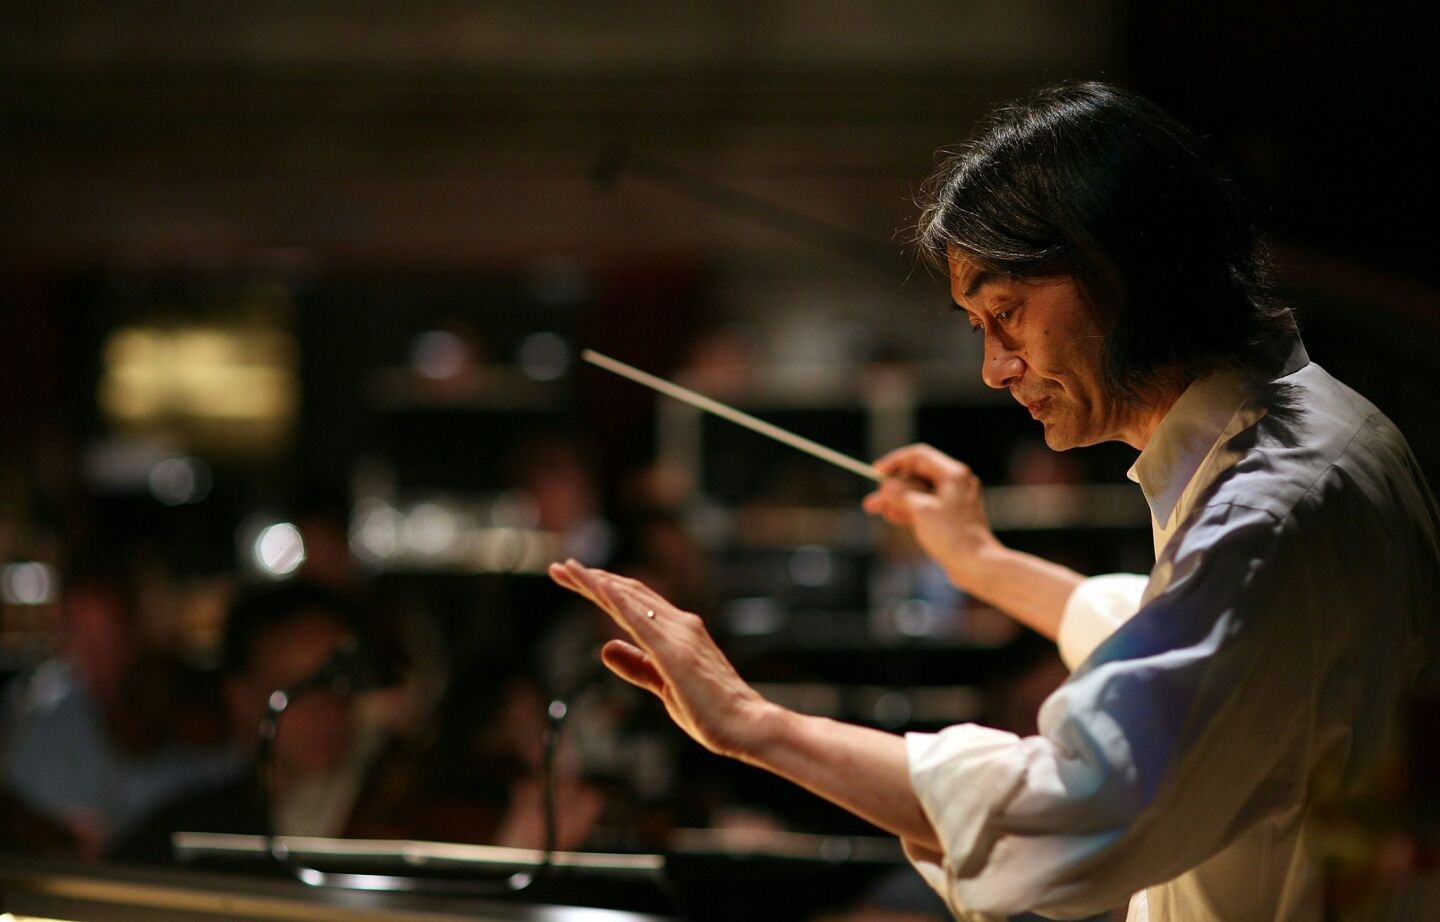 Appointed in 2003 as the company's first music director, Nagano brought a consistent orchestral excellence to the company. He left L.A. Opera in 2006 and was succeeded by James Conlon, who has led the Paris National Opera among other European companies and who continues as music director.